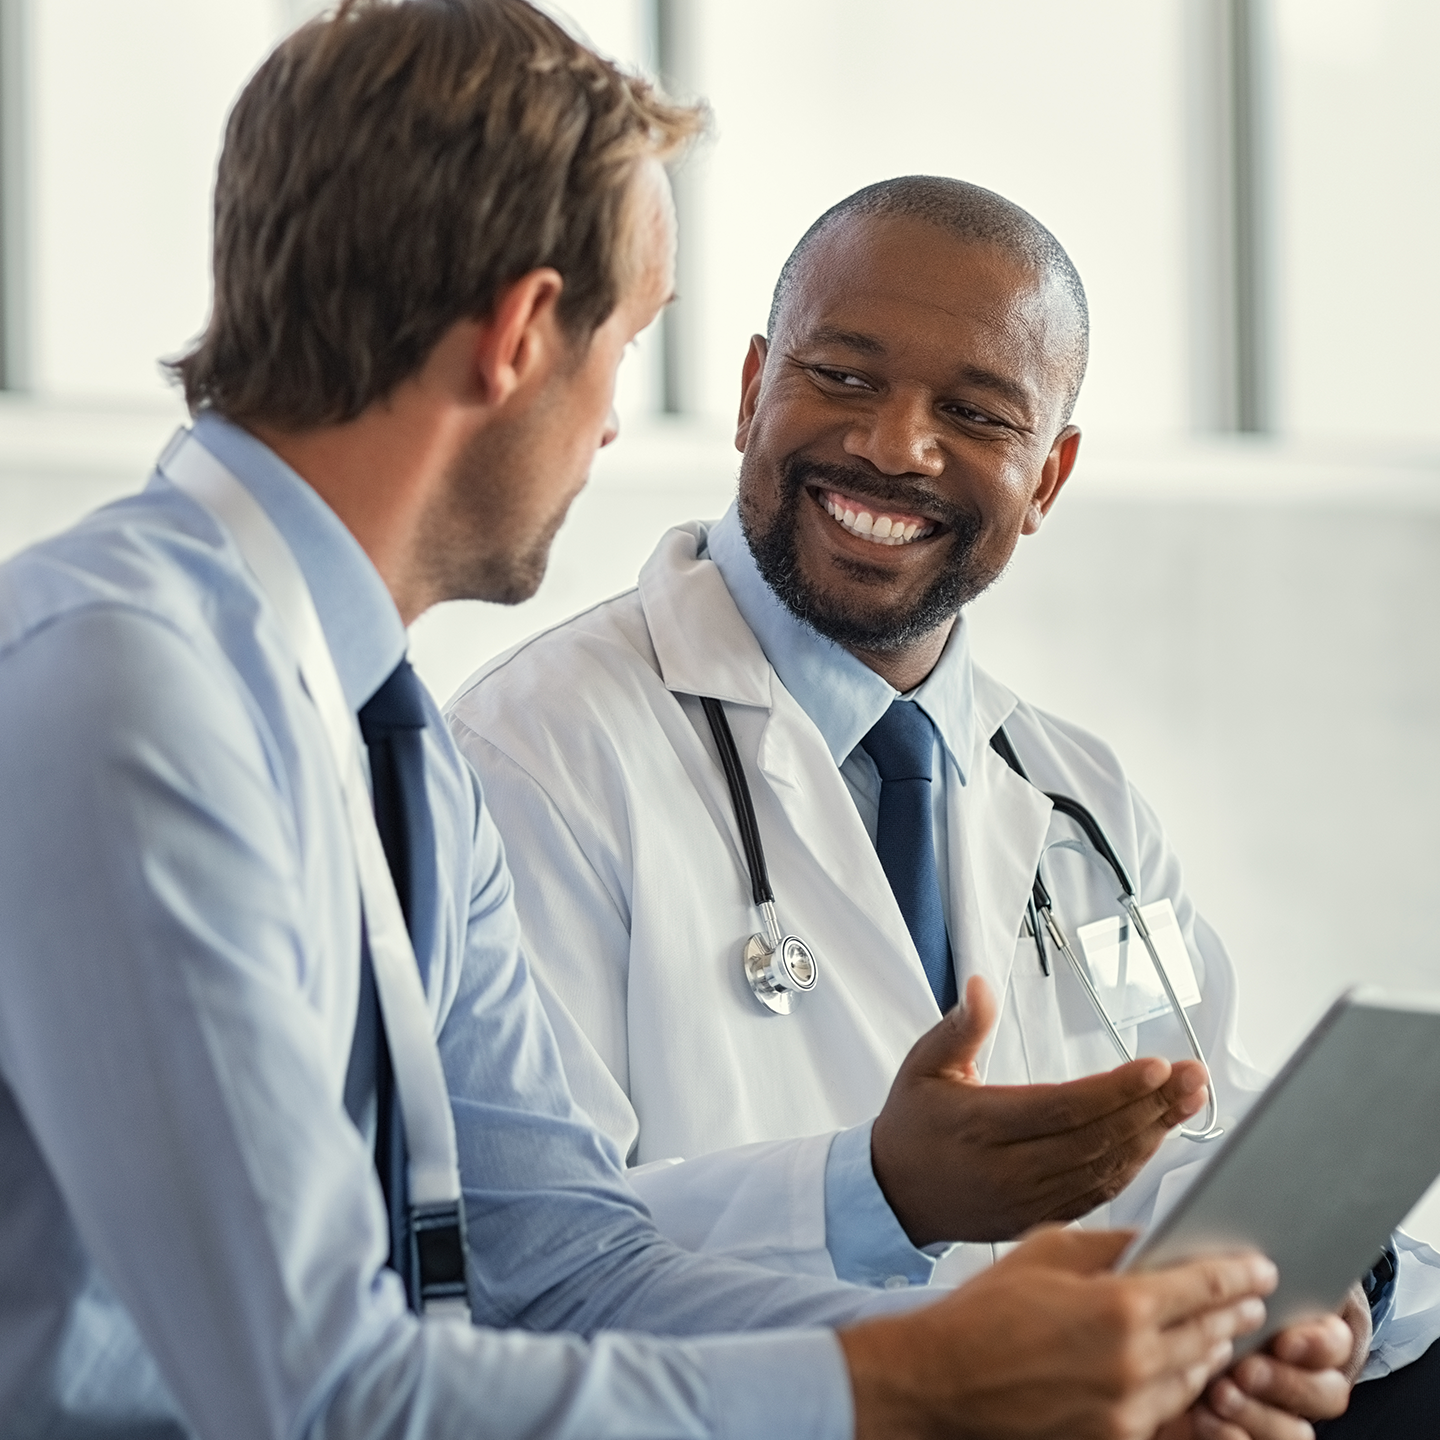 Locum tenens physicians may be a good solution for healthcare facilities with urgent staffing needs.